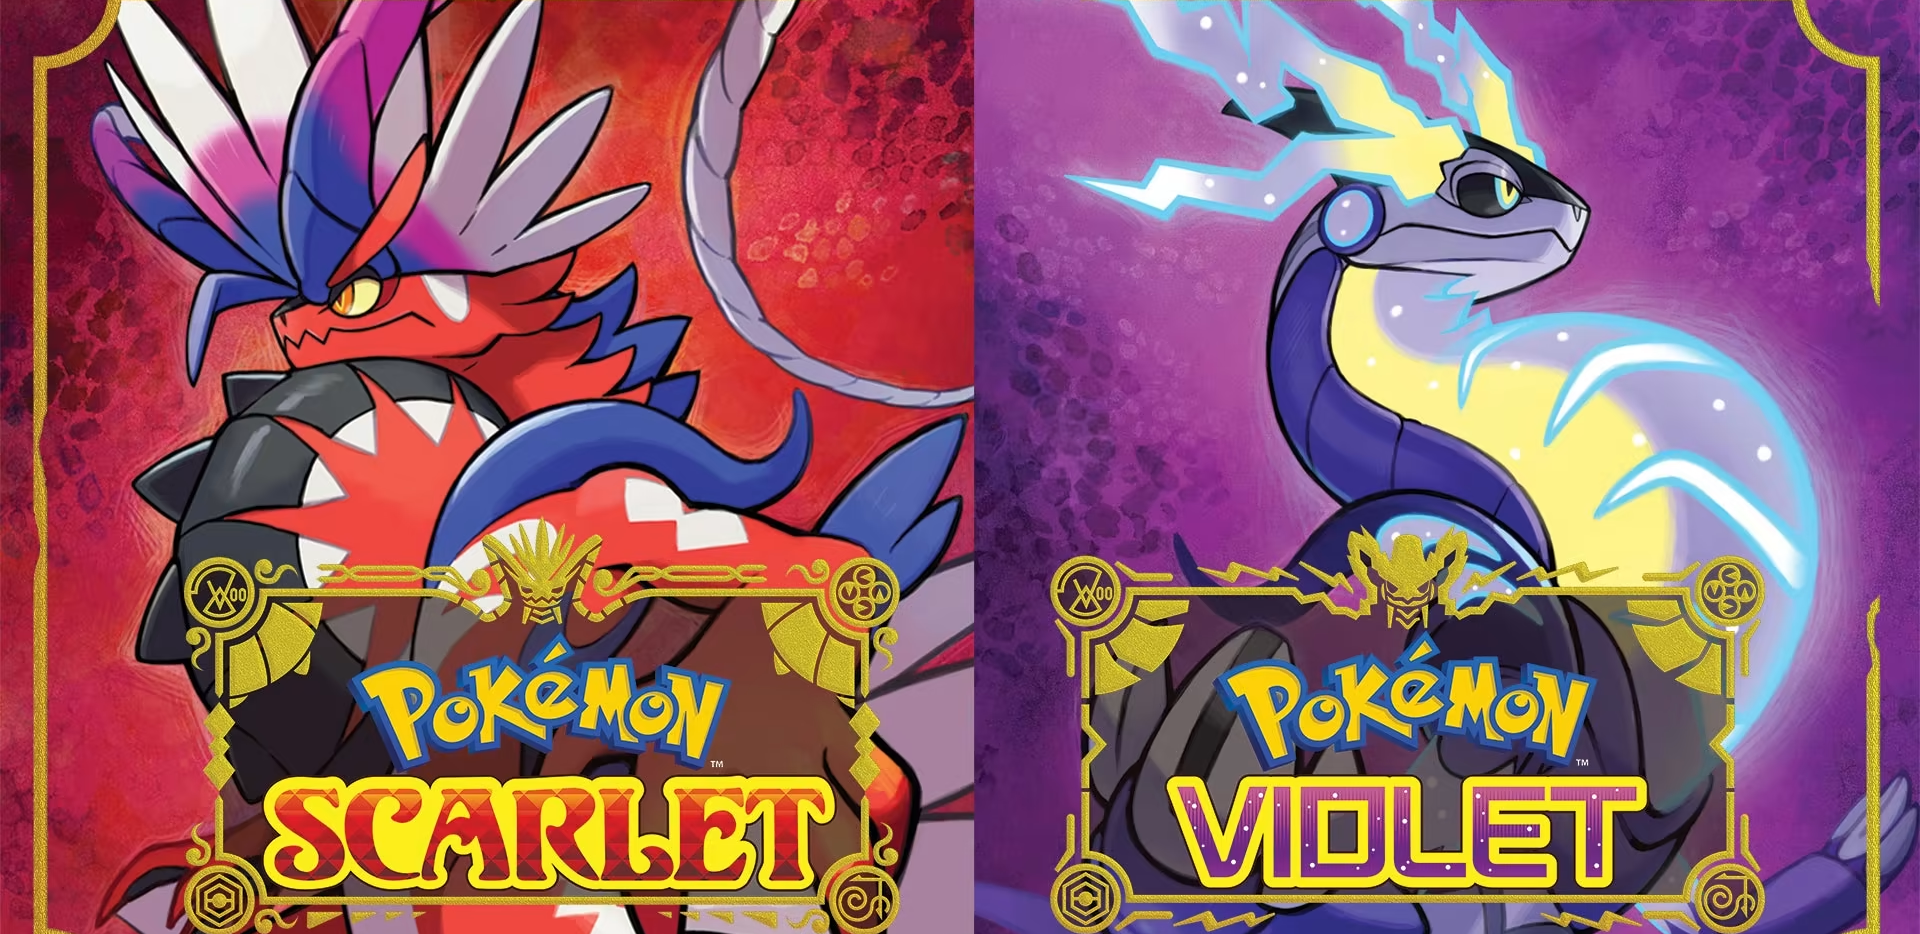 All Kingambit weaknesses in Pokémon Scarlet and Violet - Gamepur